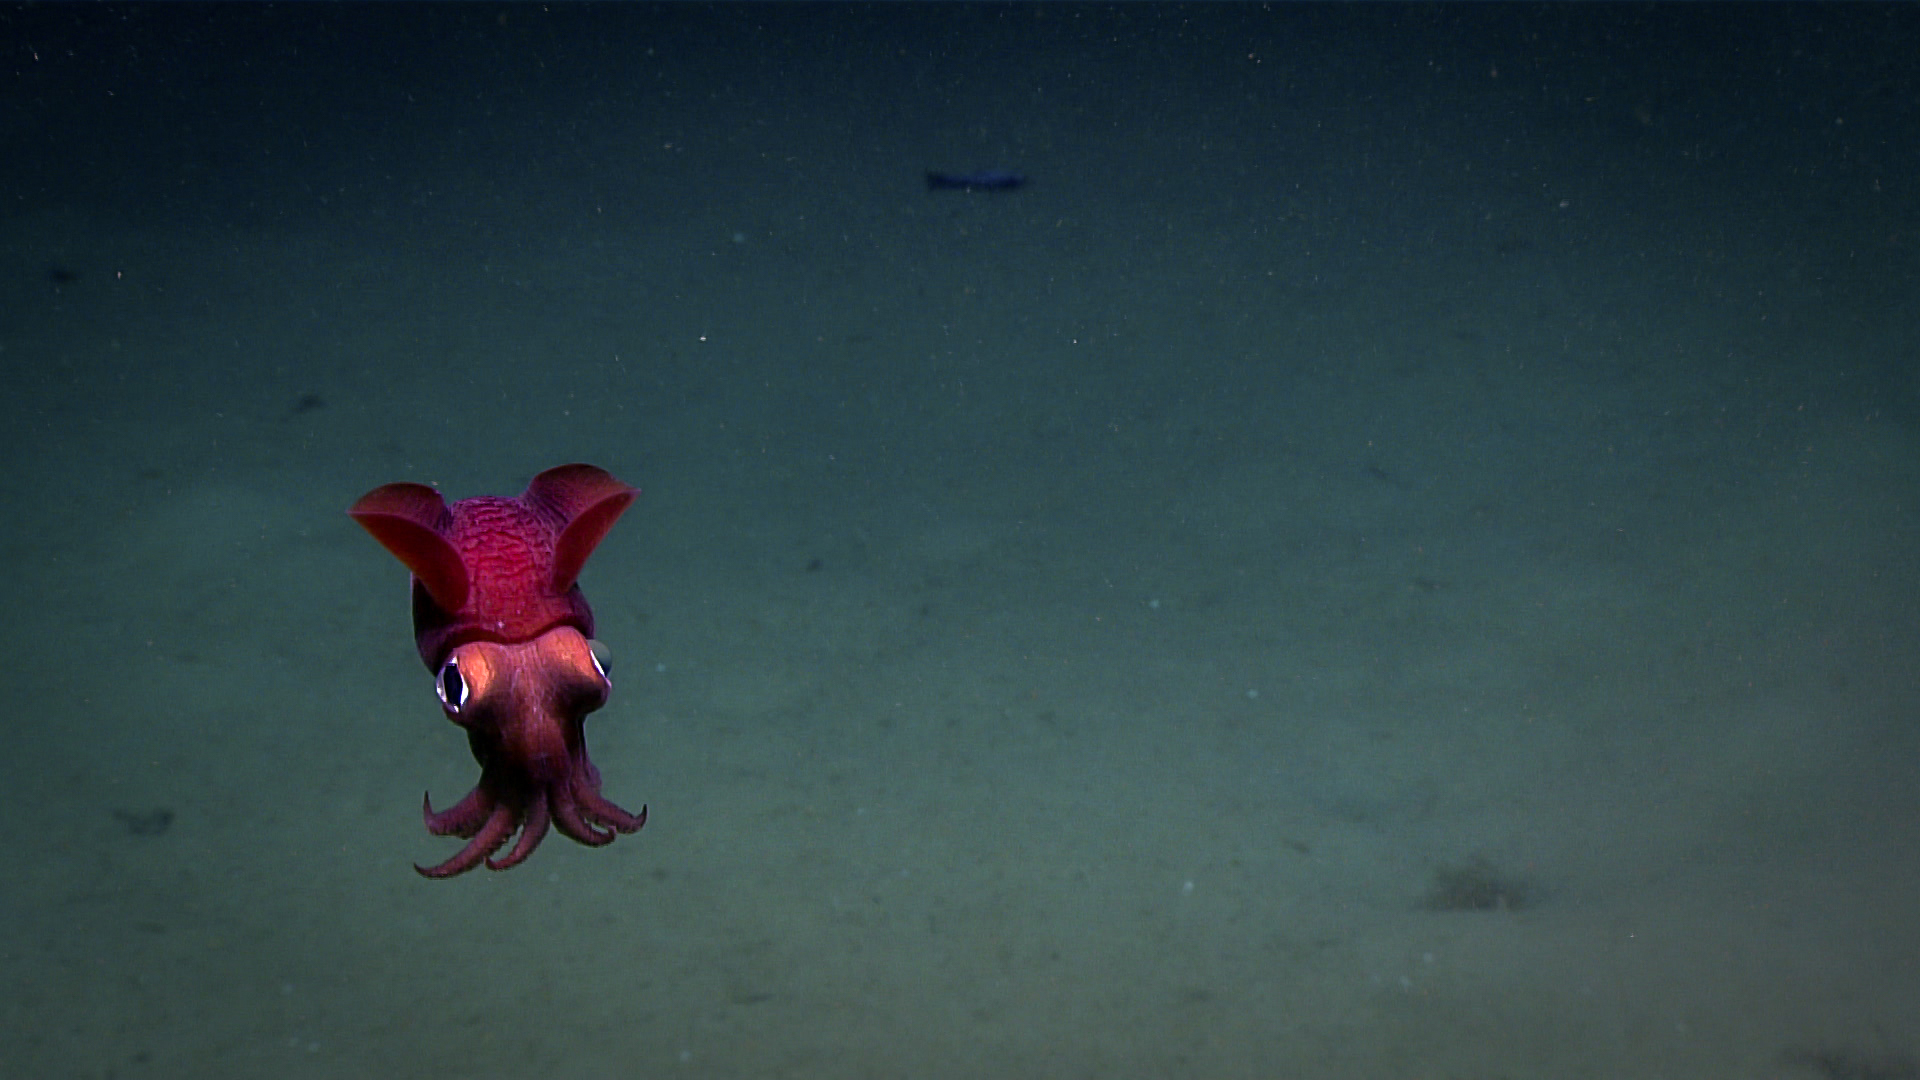 A deep red squid with small tentacles and a pink face with one eye either side, against a deep blue-green background